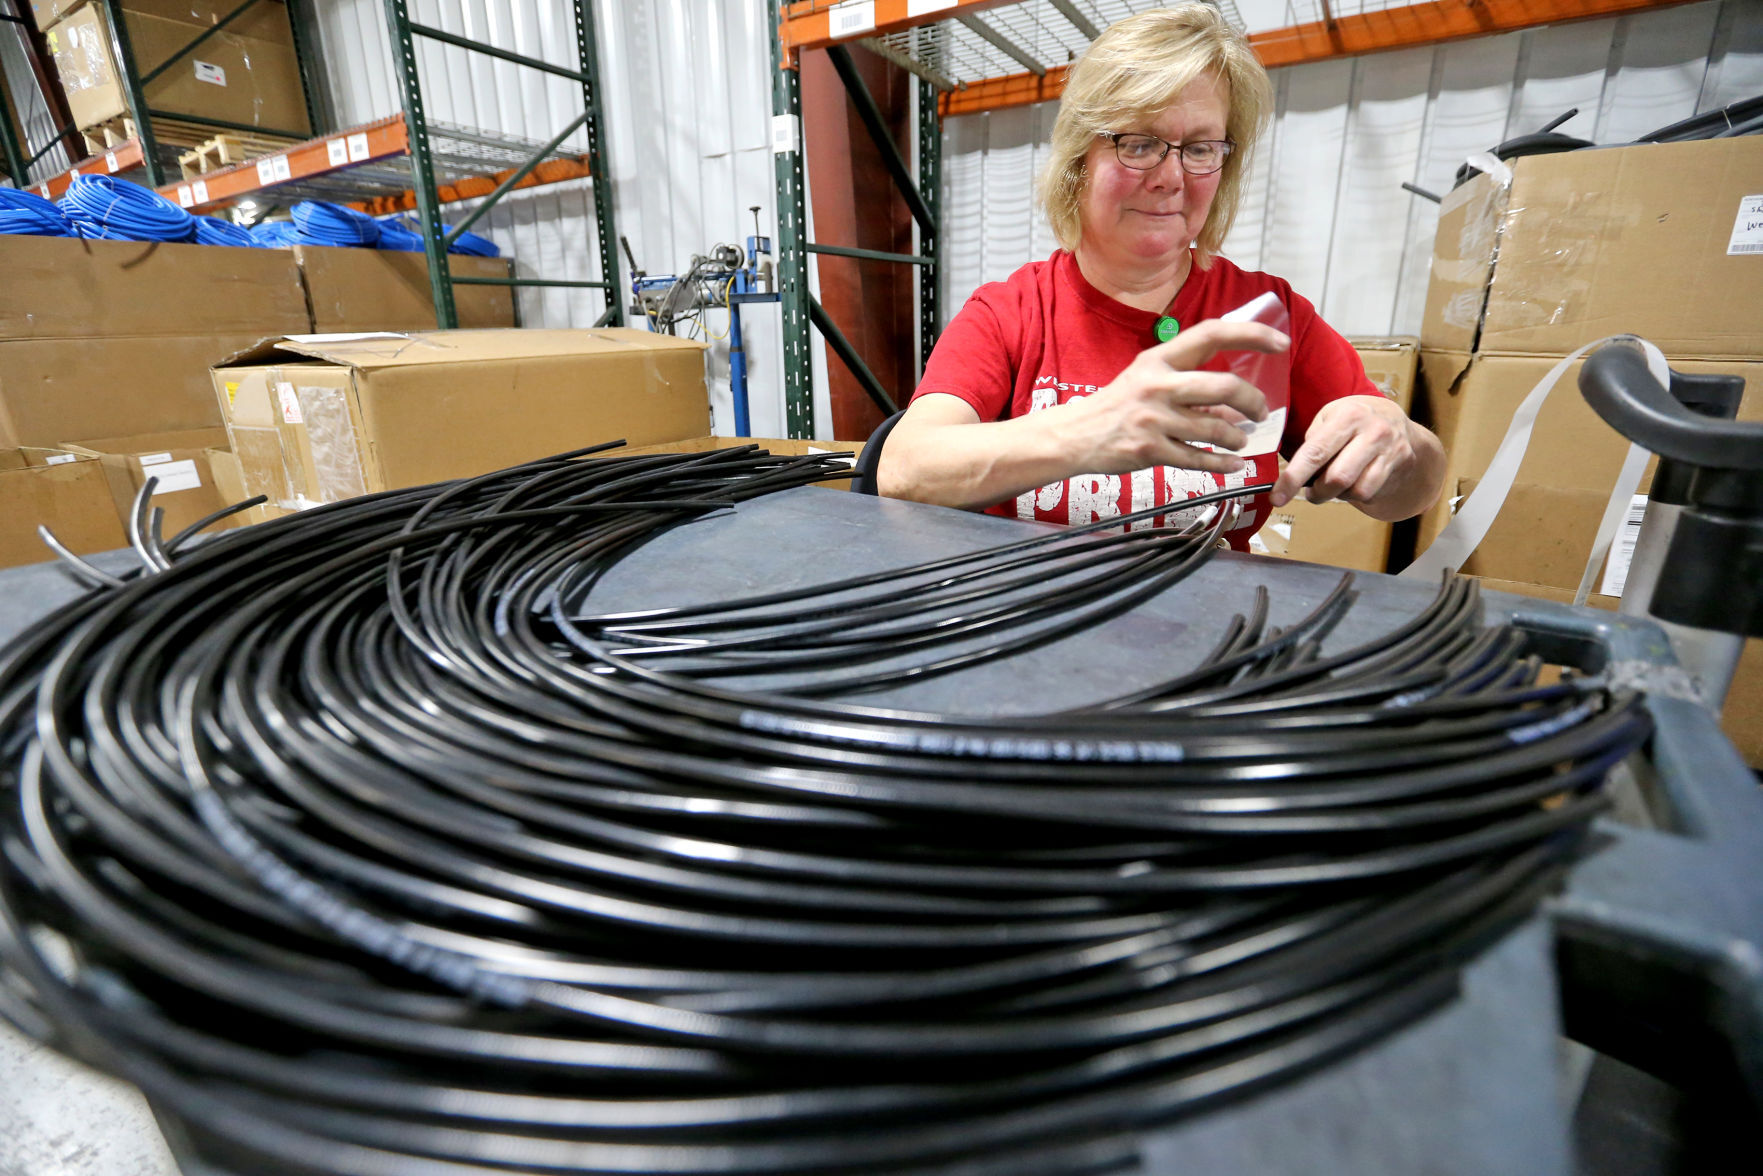 Linda Besler applies a label on a hydraulic hose at ProPulse, a Schieffer company, in Peosta, Iowa, on Friday.    PHOTO CREDIT: JESSICA REILLY, Telegraph Herald